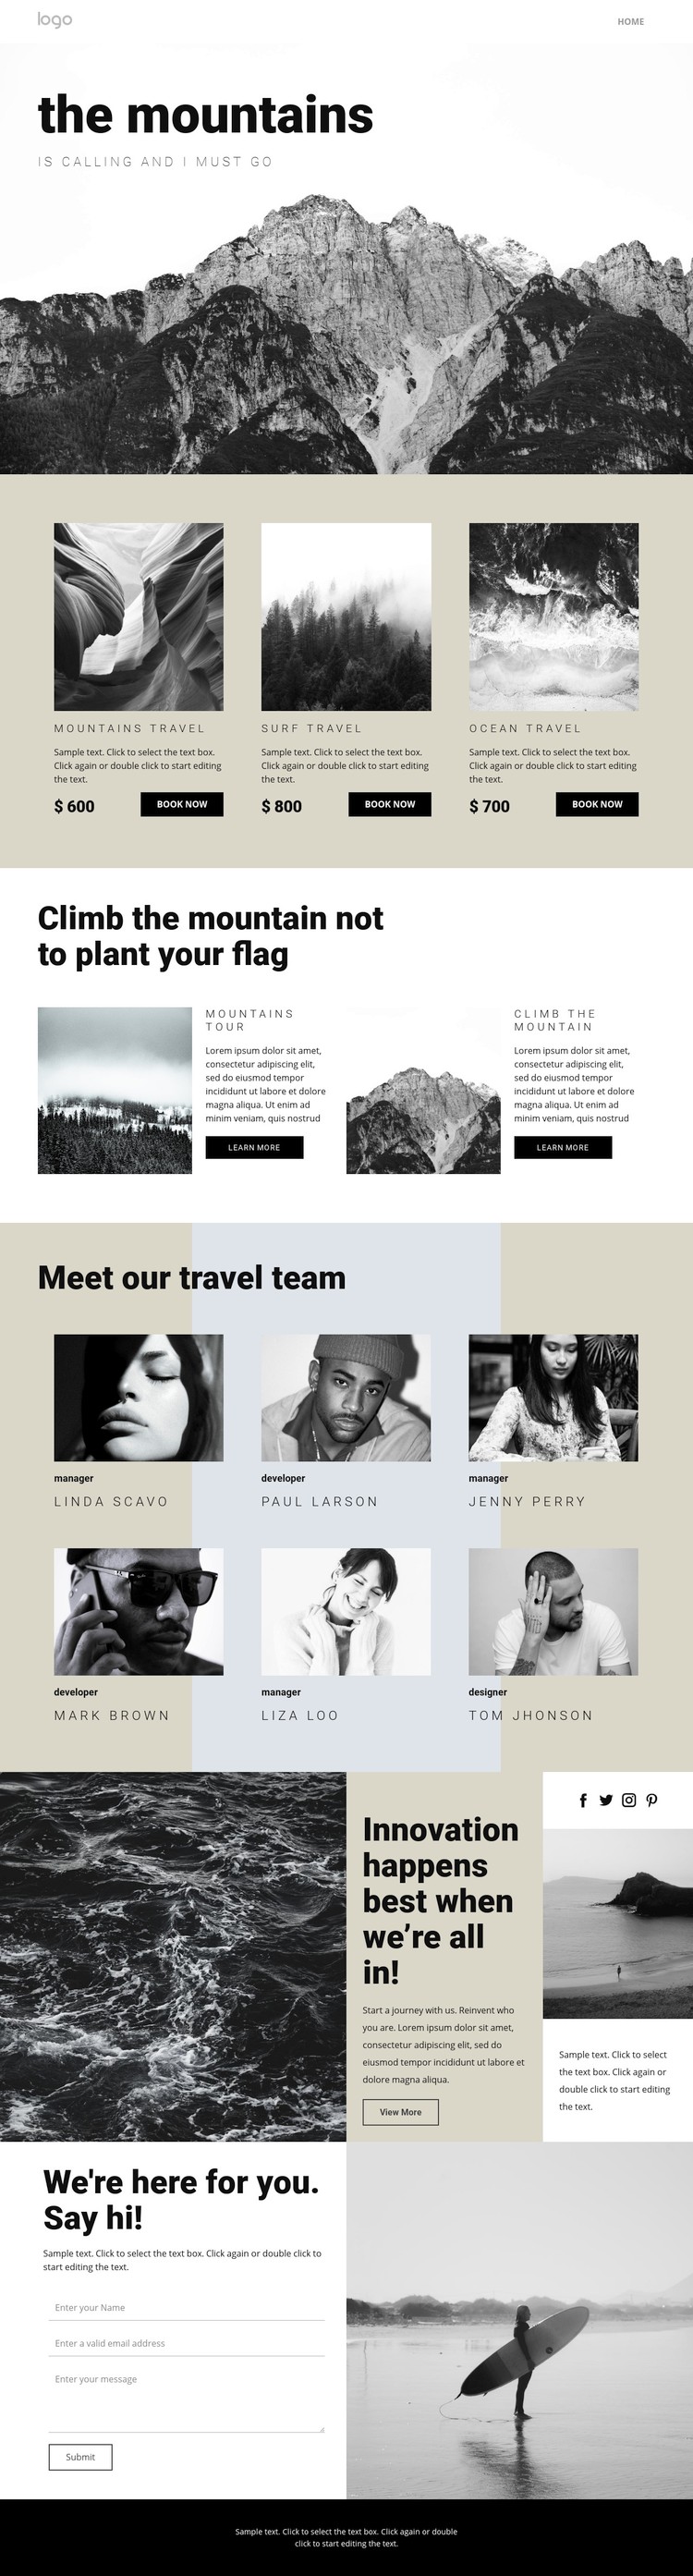 Agency for people who travel Webflow Template Alternative